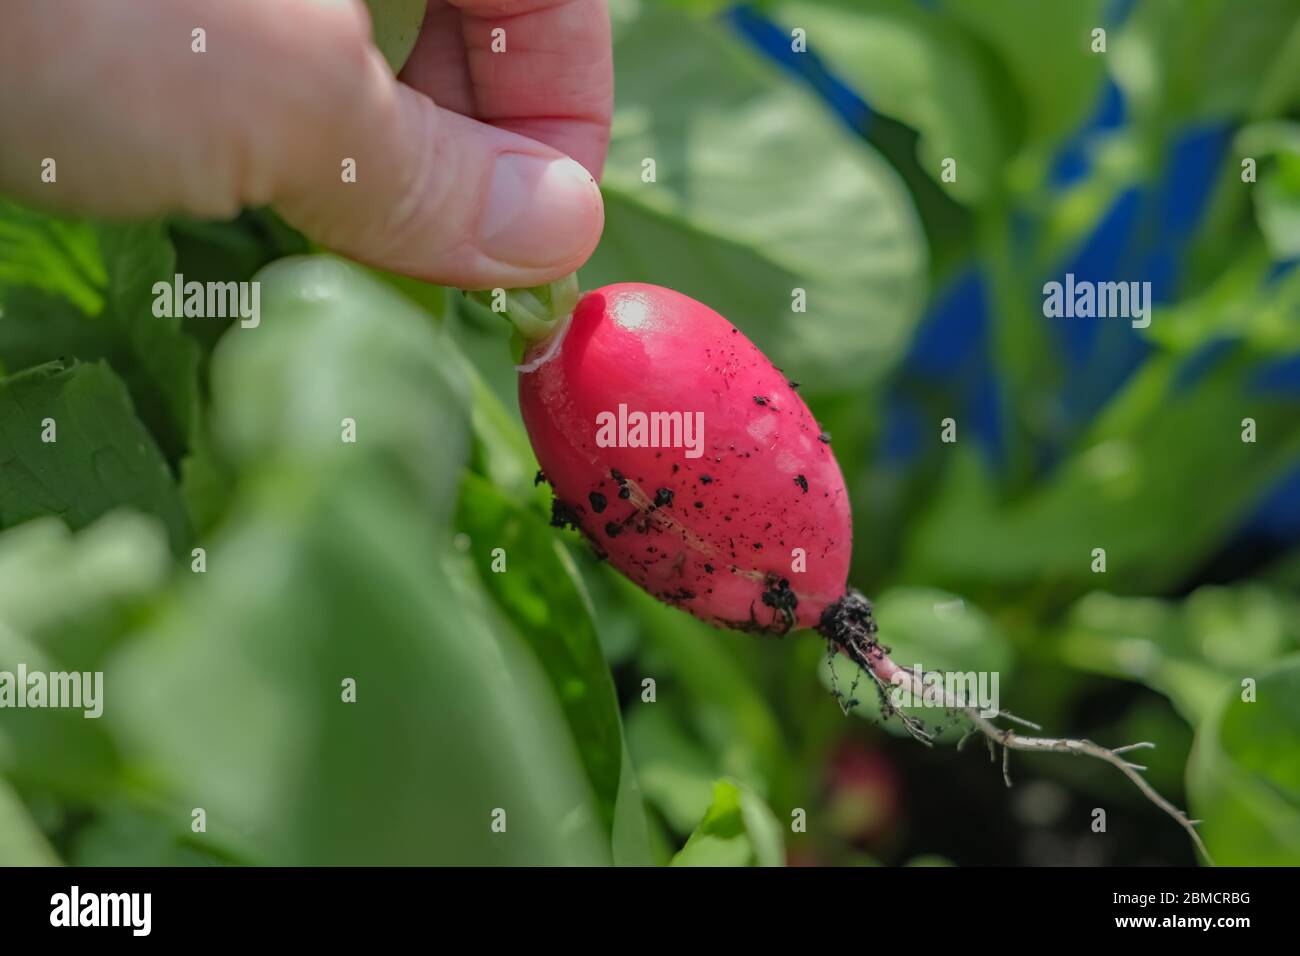 Unidentifiable gardener holding a homegrown and organic radish (Raphanus sativus) after harvesting from a plant Stock Photo